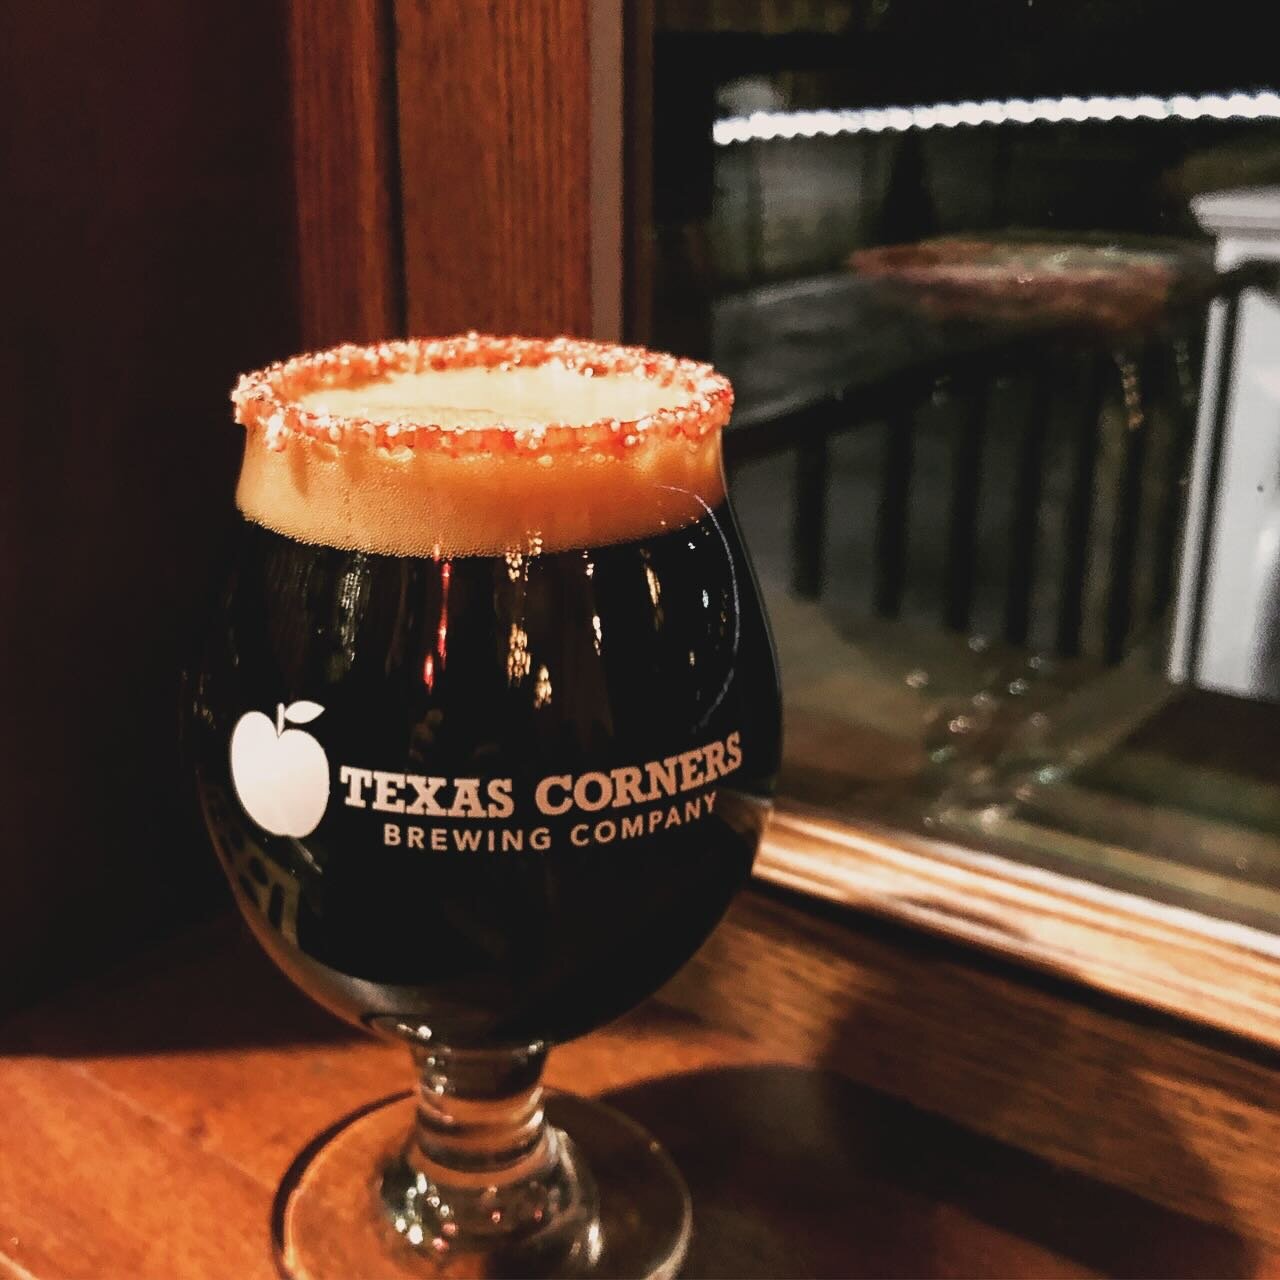 Santa Stout is now on draft for a very limited time. This smooth drinking peppermint milk stout drinks like a liquid Andes mint. We even have a bourbon barrel-aged version available too. Expect this one to only last a week or so!